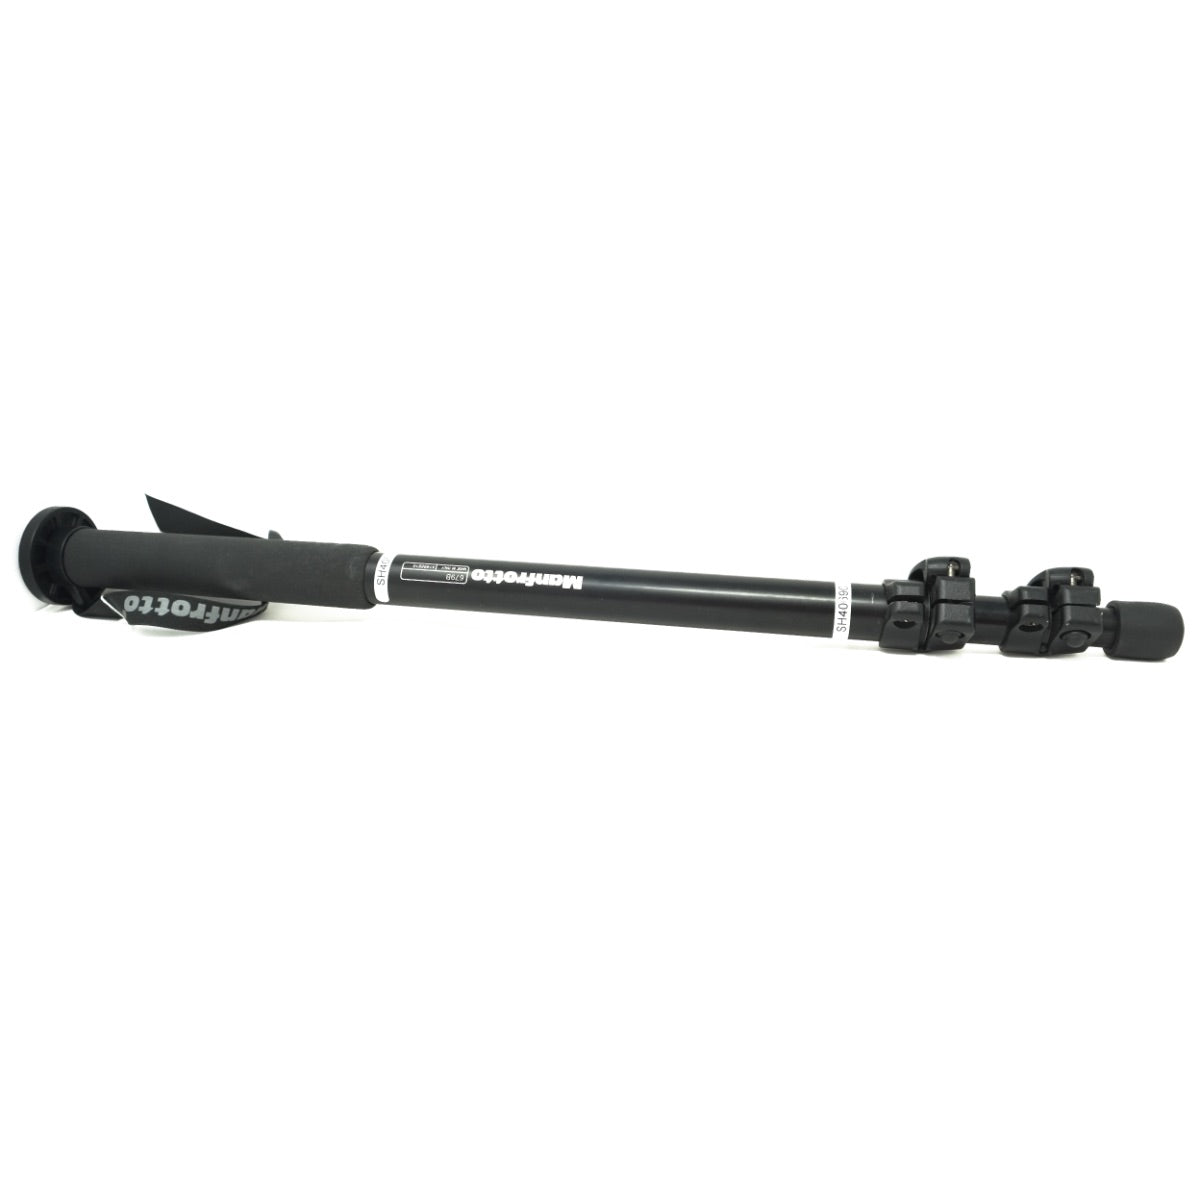 Used Manfrotto Monopod